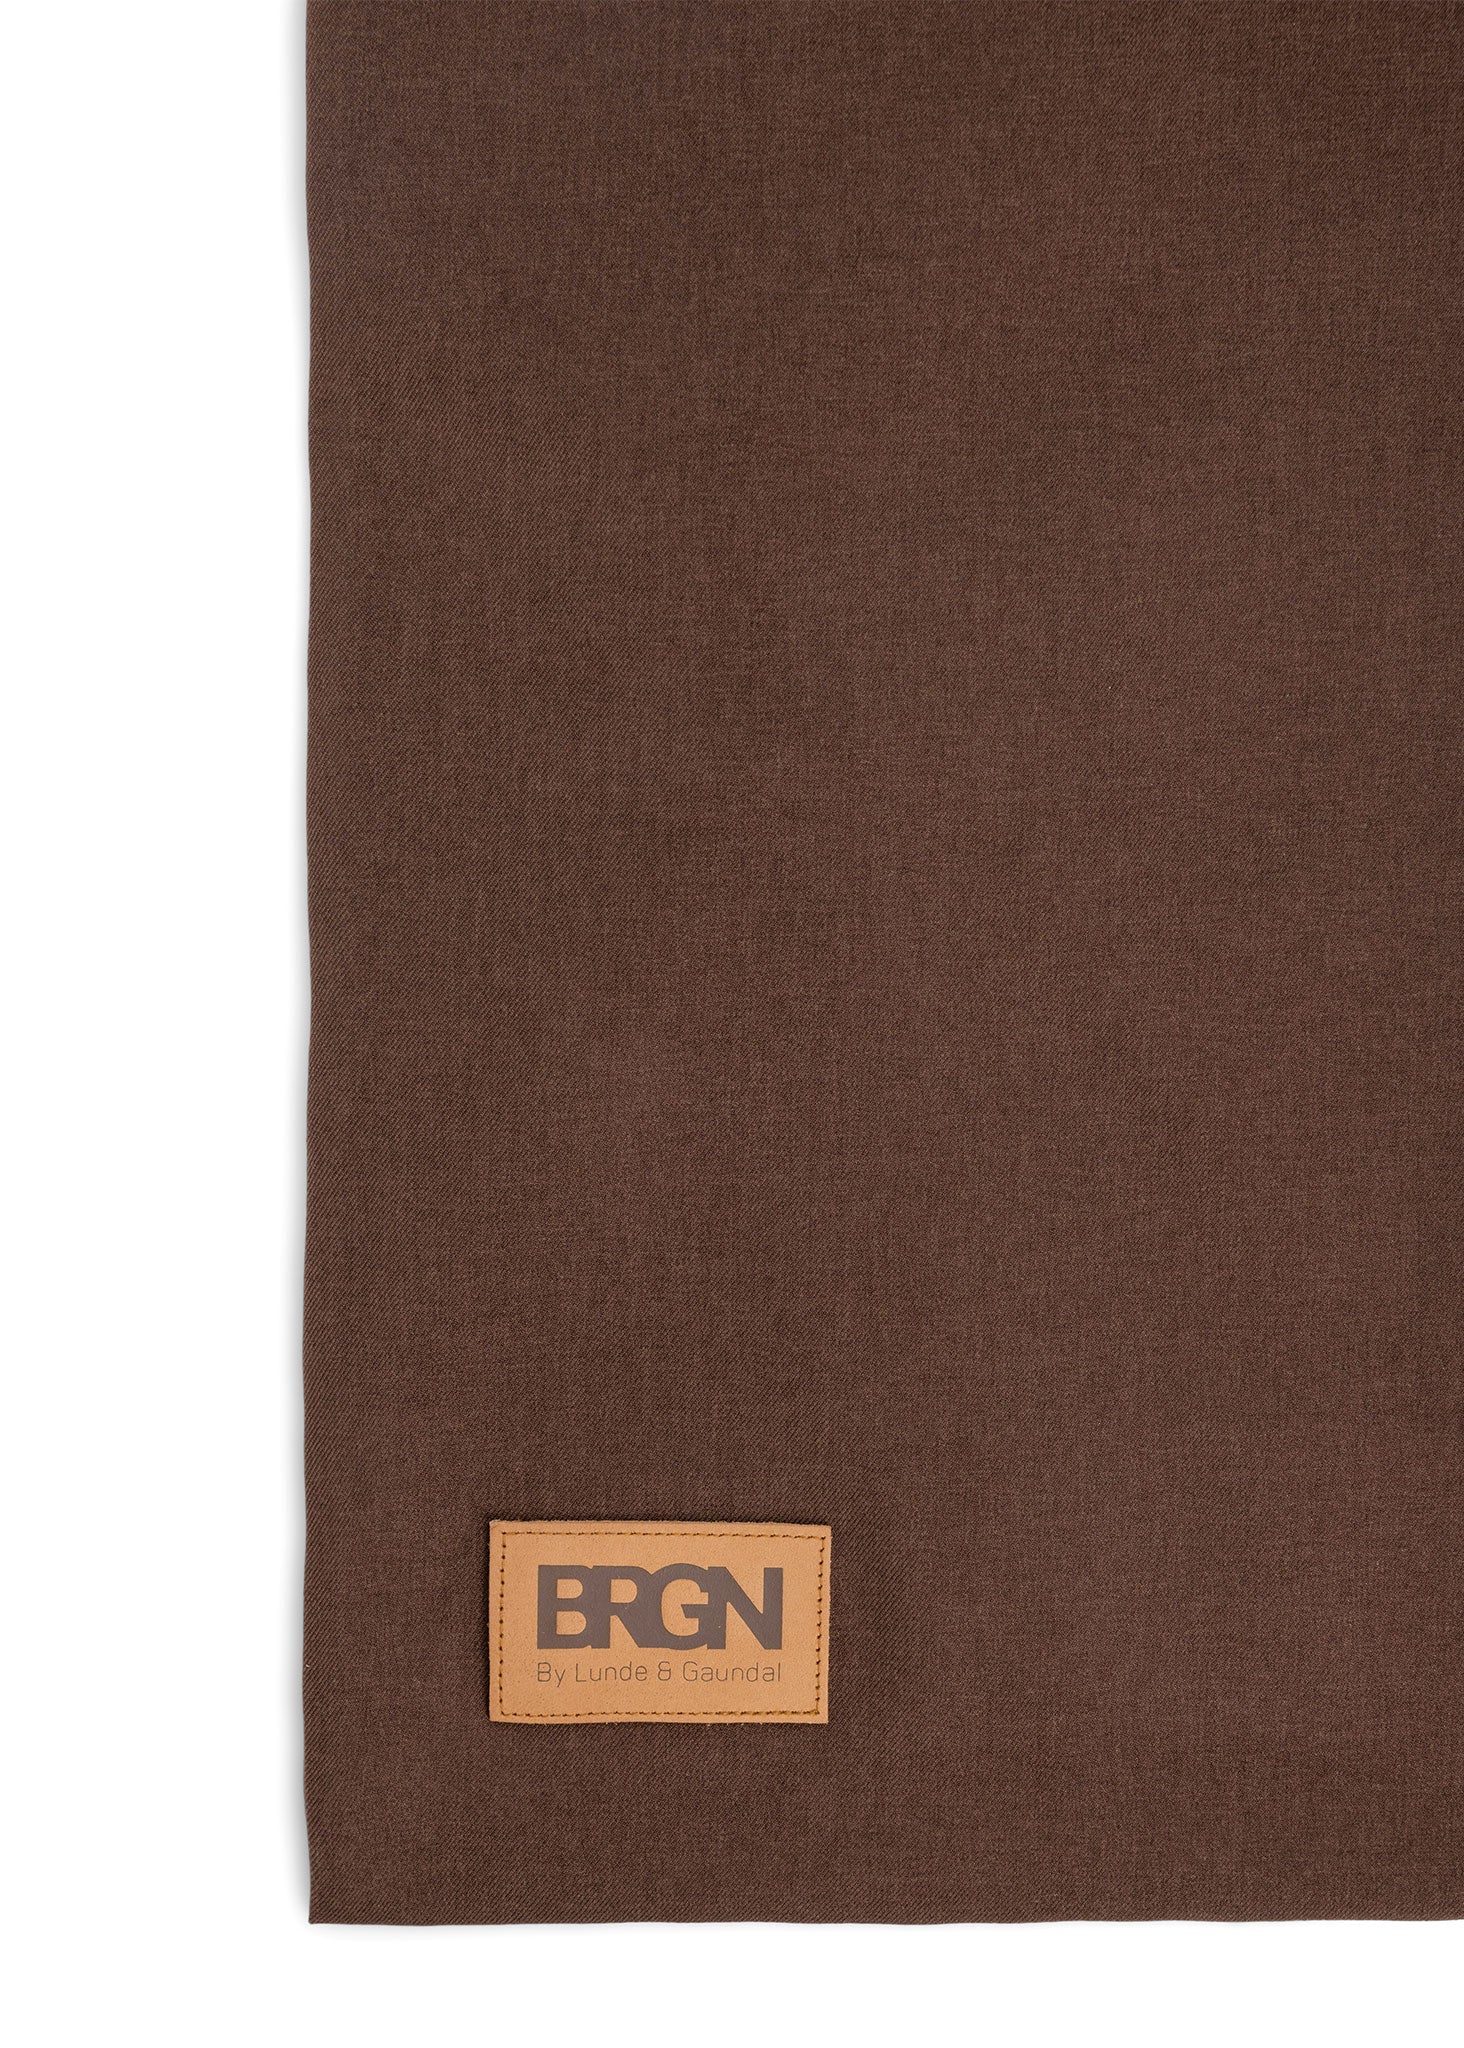 BRGN Tote Bag Marketing Material 187 Chocolate Brown